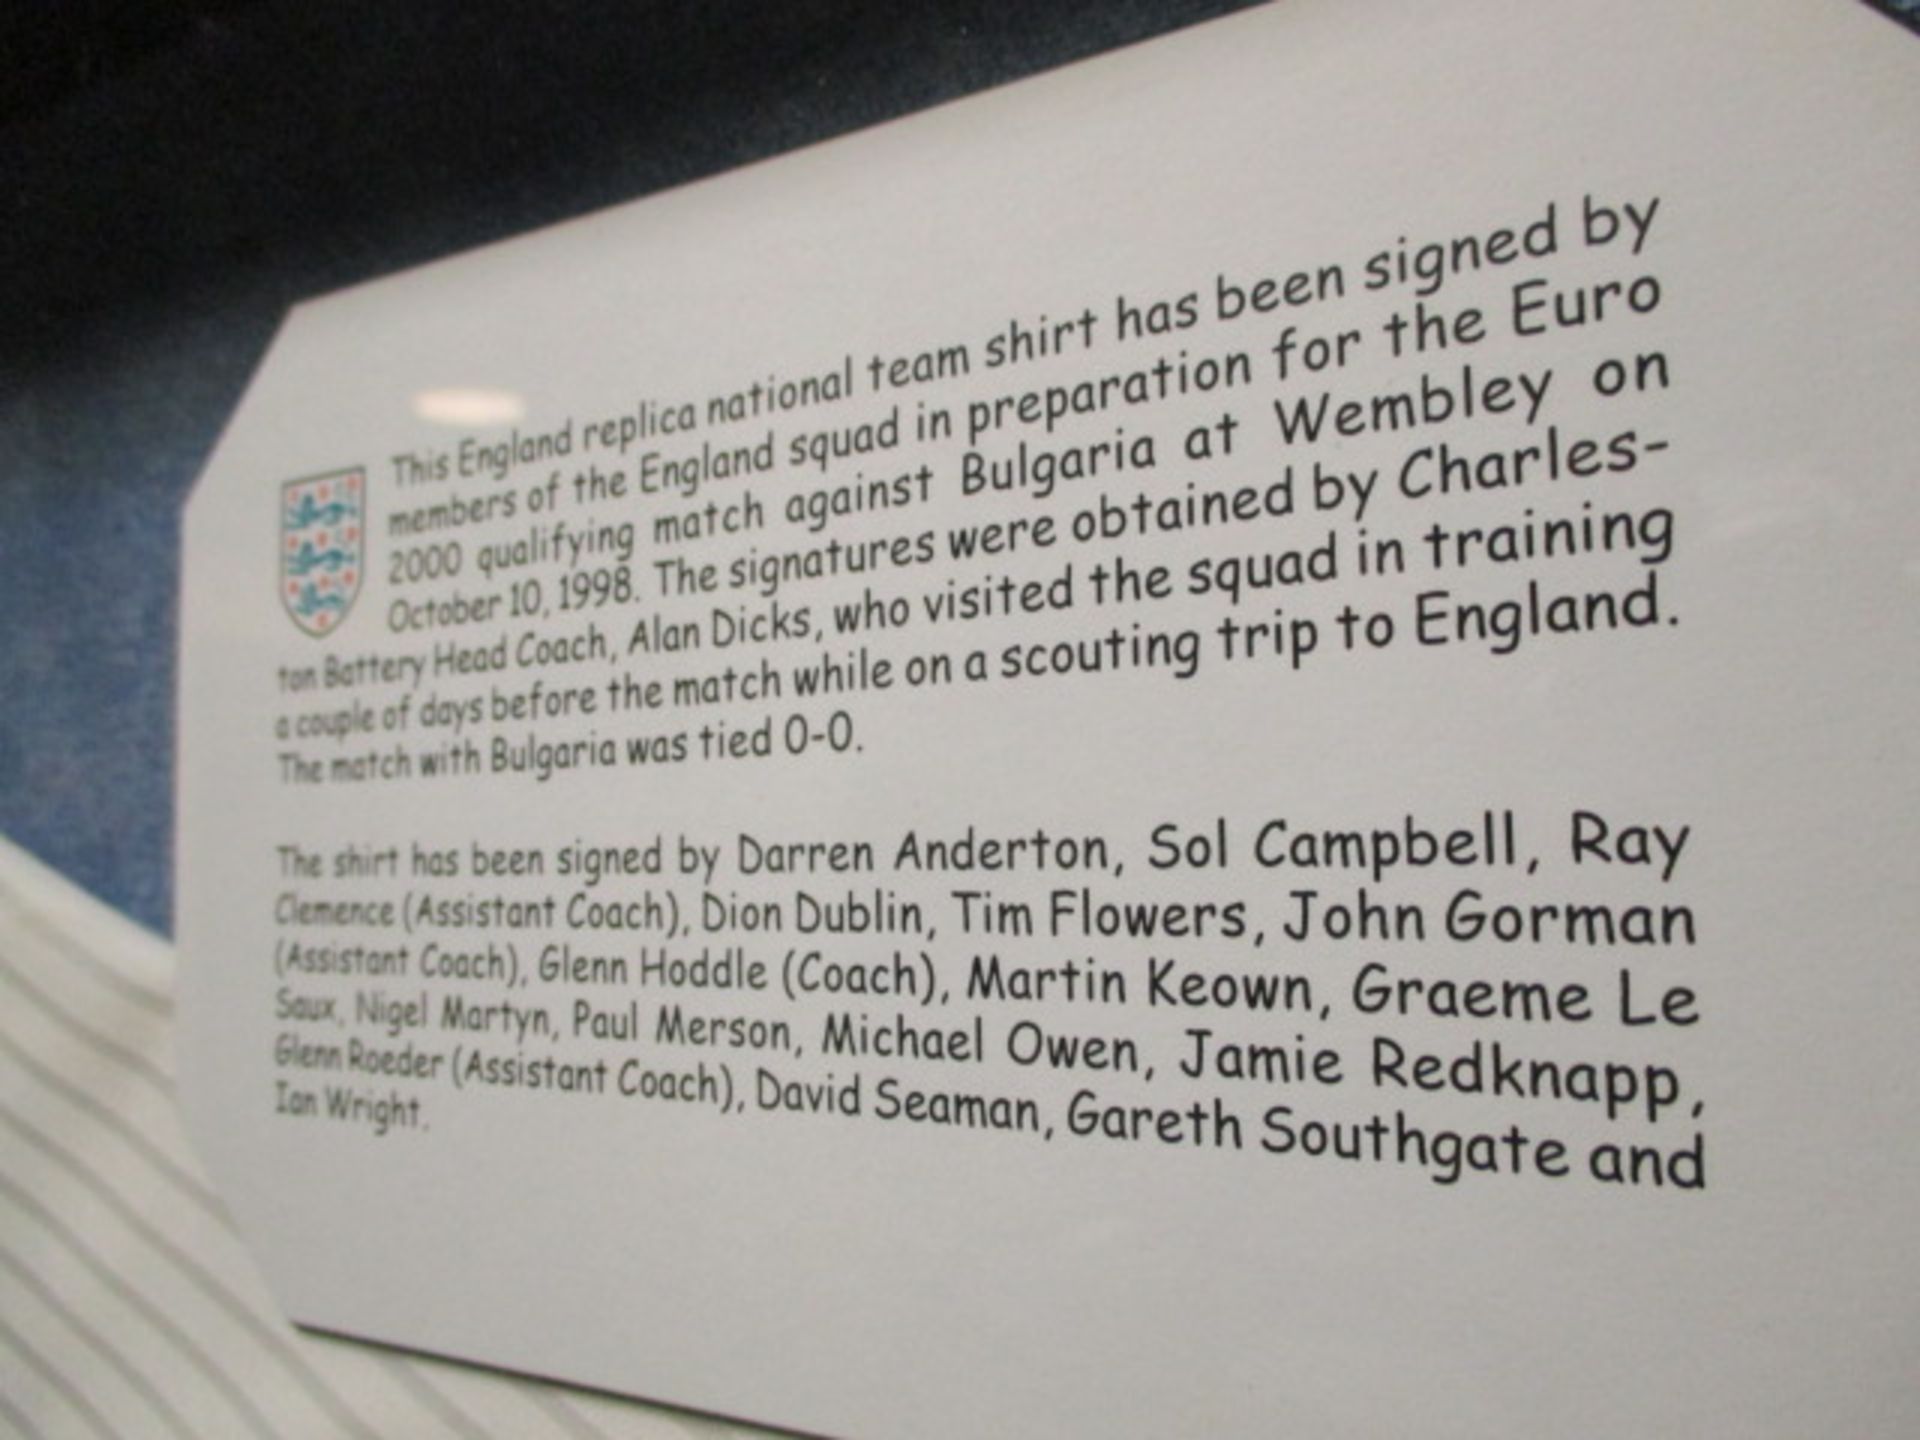 England National team signed replica jersey for Euro 2000 Euro qualifying game versus Bulgaria (Oct, - Image 3 of 3